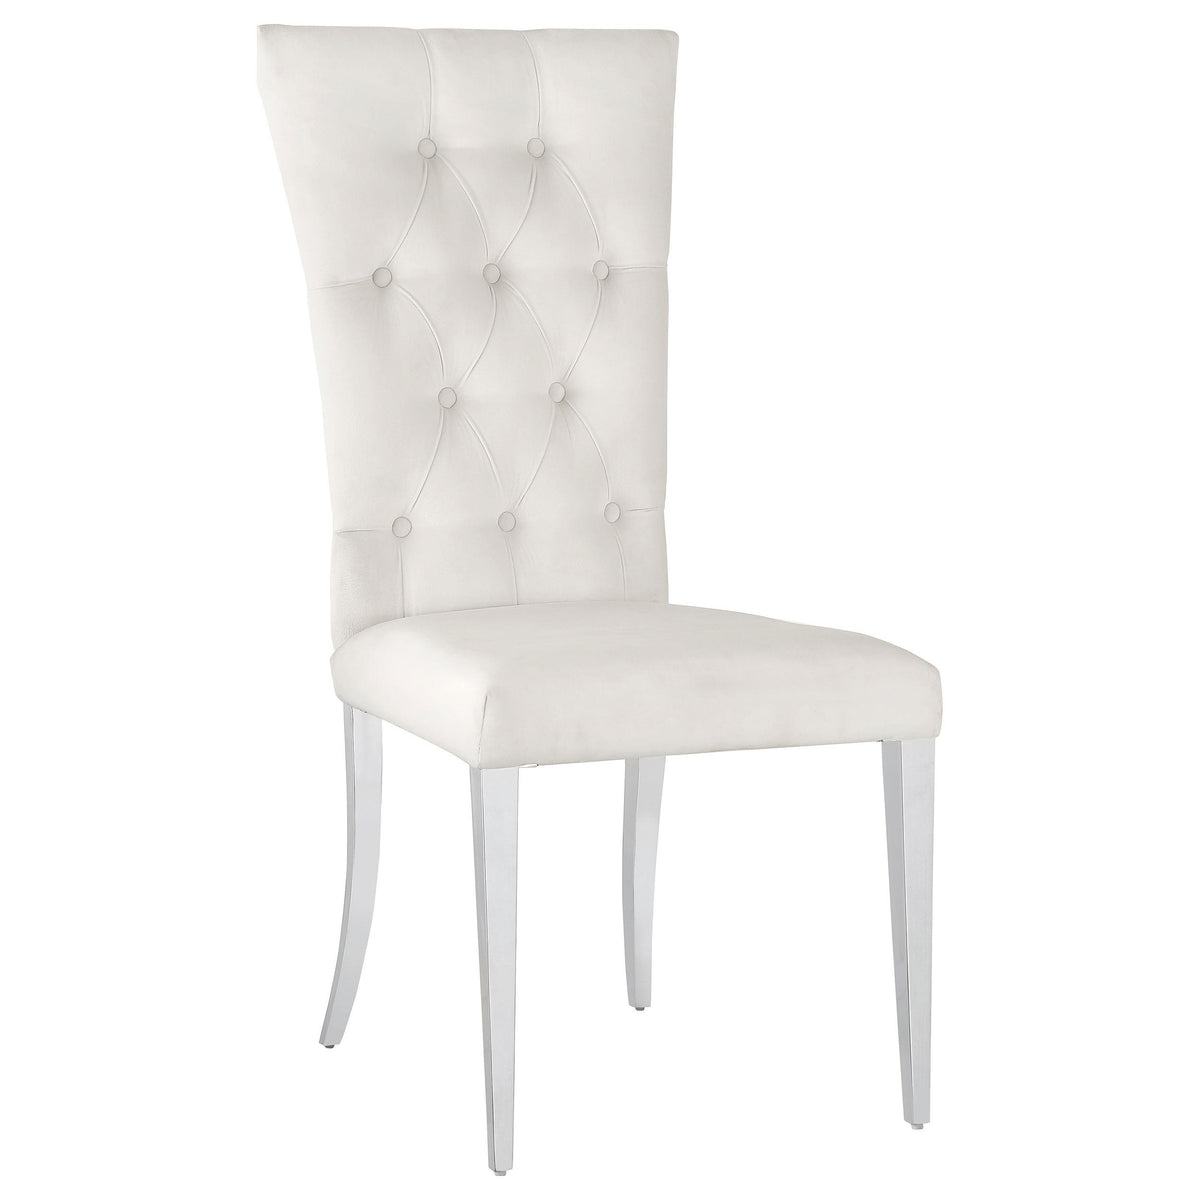 Kerwin Tufted Upholstered Side Chair (Set Of 2) - Half Price Furniture